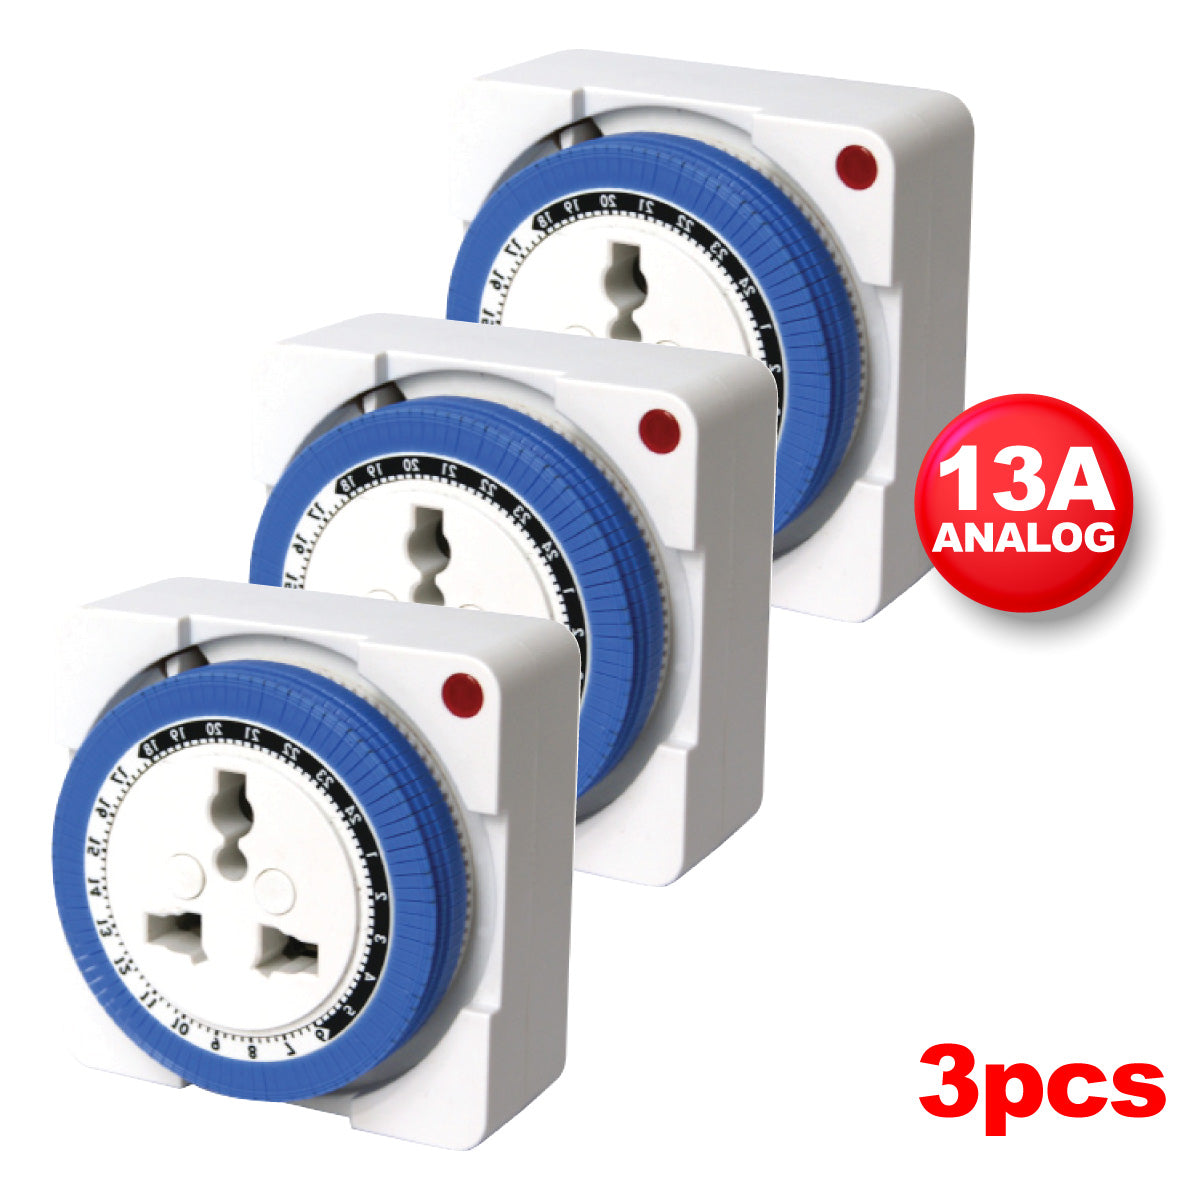 Mechanical 24hrs Timer plug in (TH124)